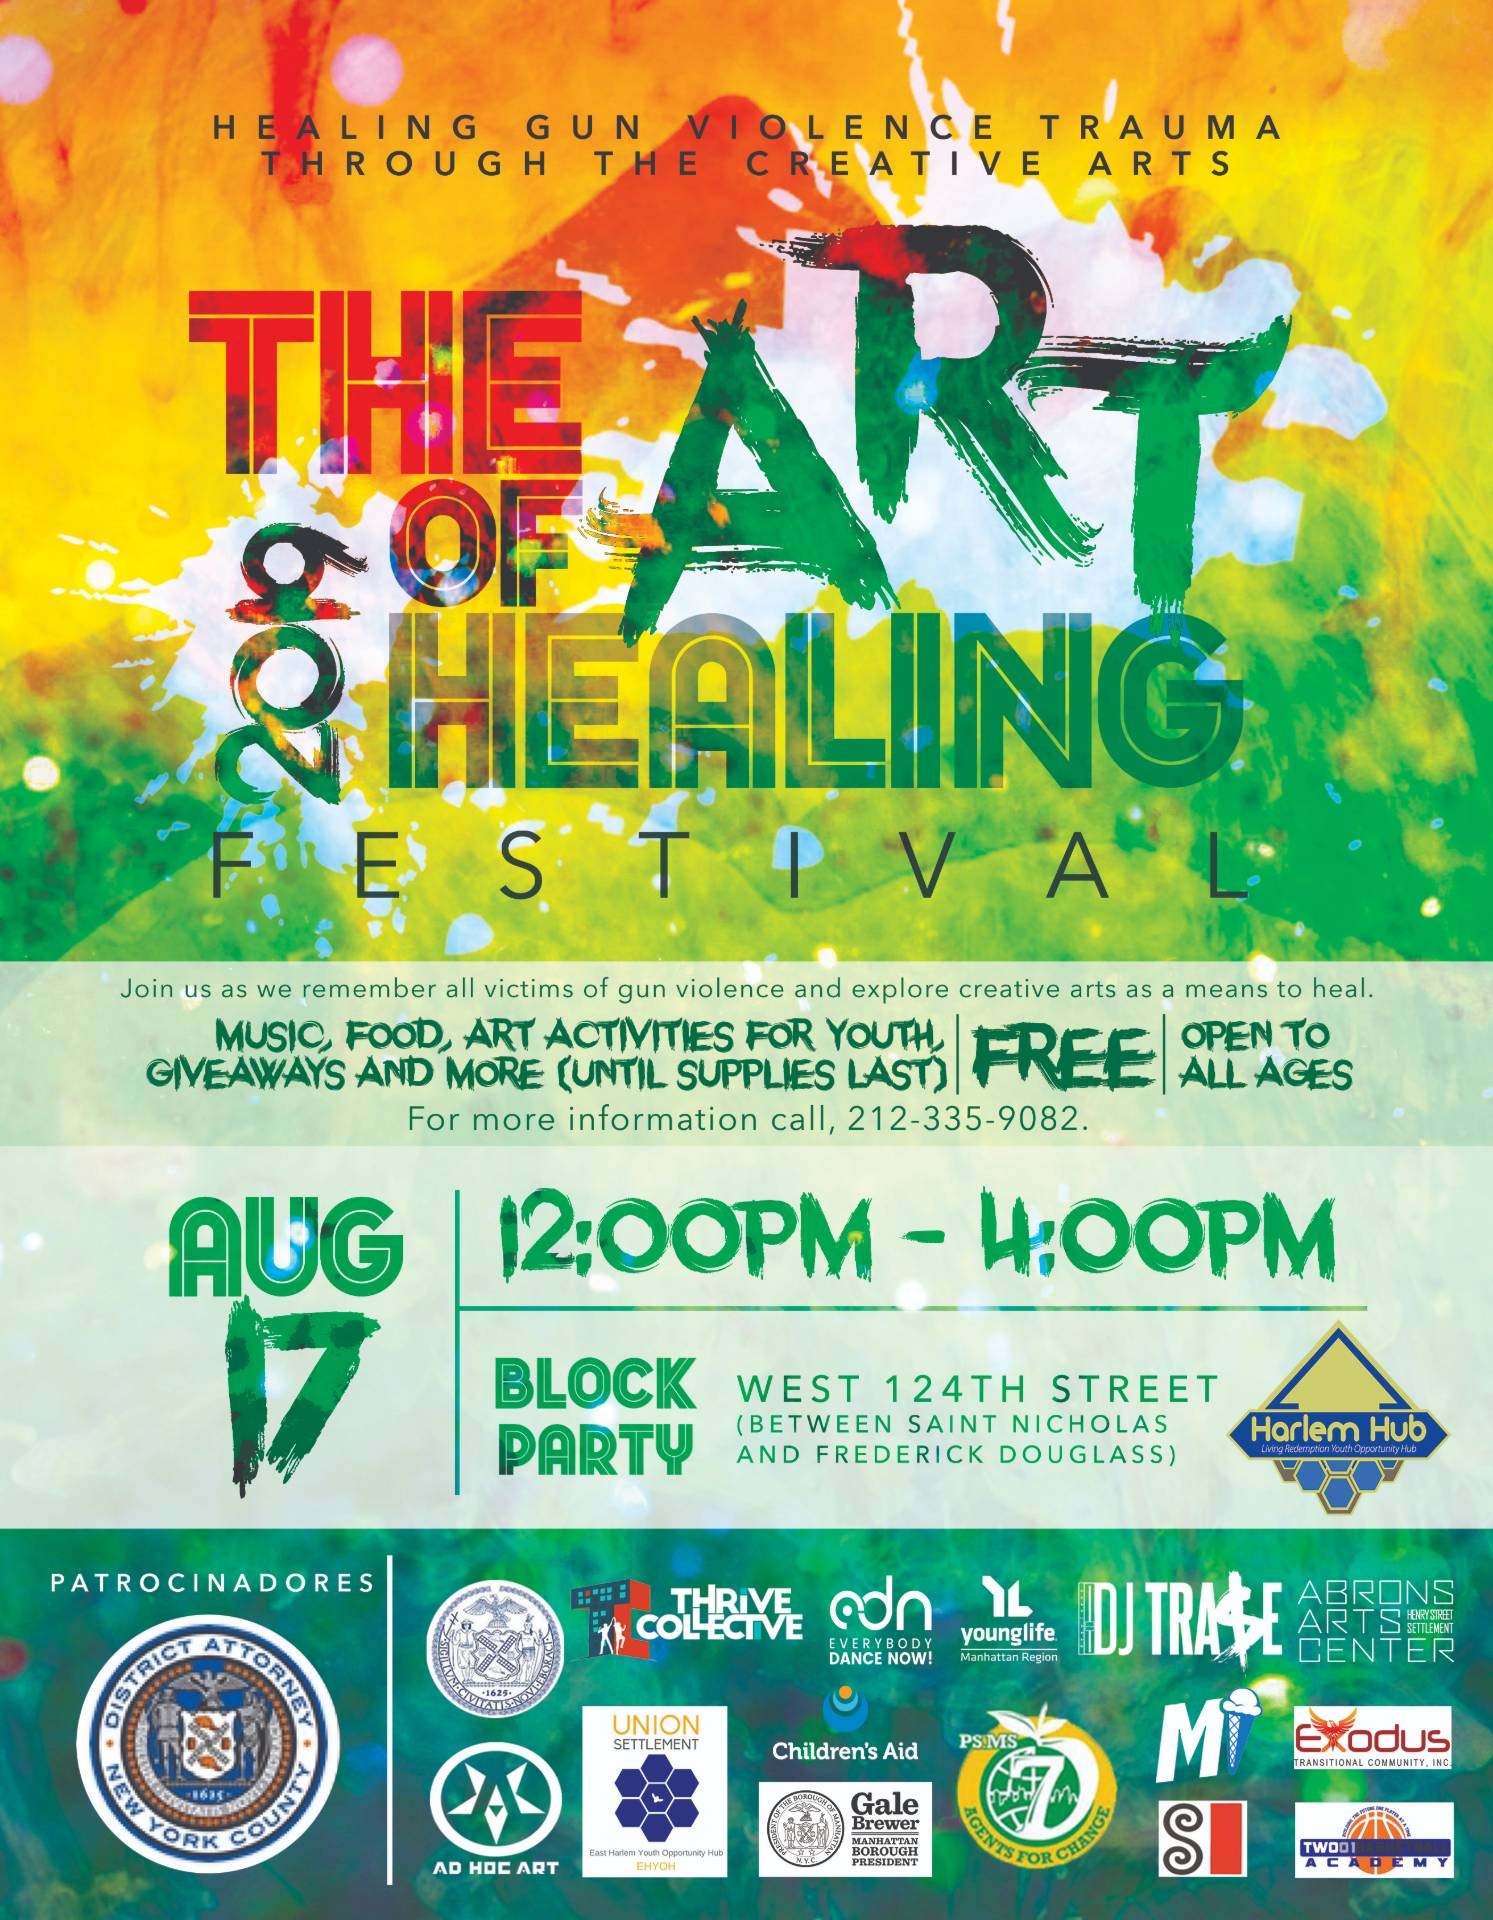 The Art of Healing Festival: Healing Gun Violence Trauma Through the Creative Arts flyer, with location, time, and activity information